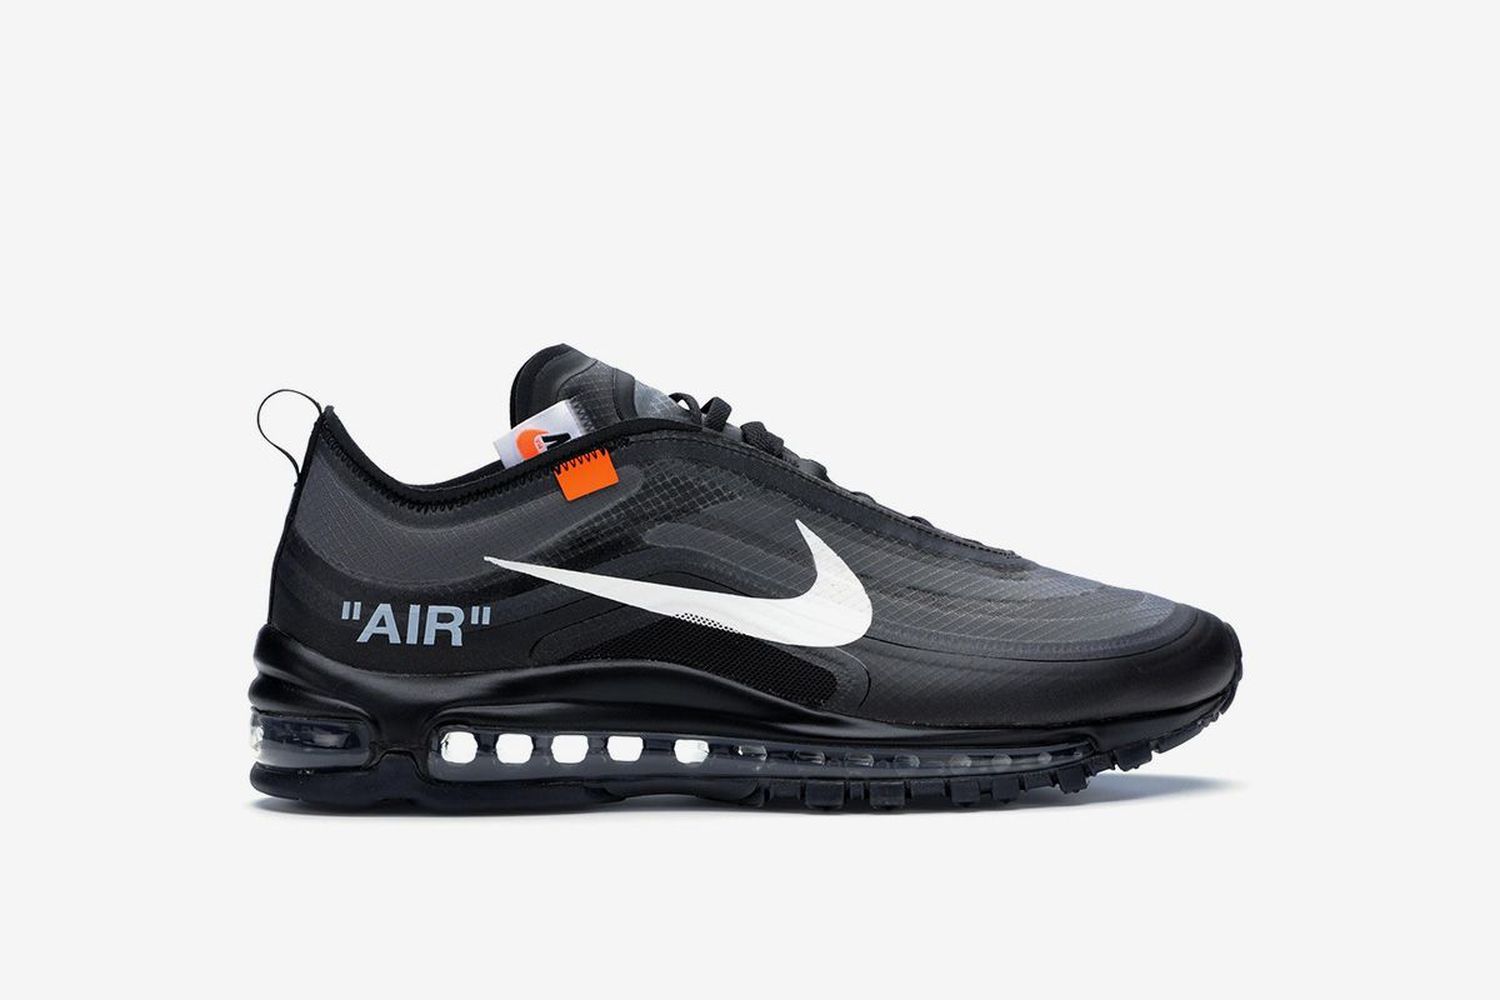 Where to Cop the OFF-WHITE x Nike Air Max 97s if you Missed Out